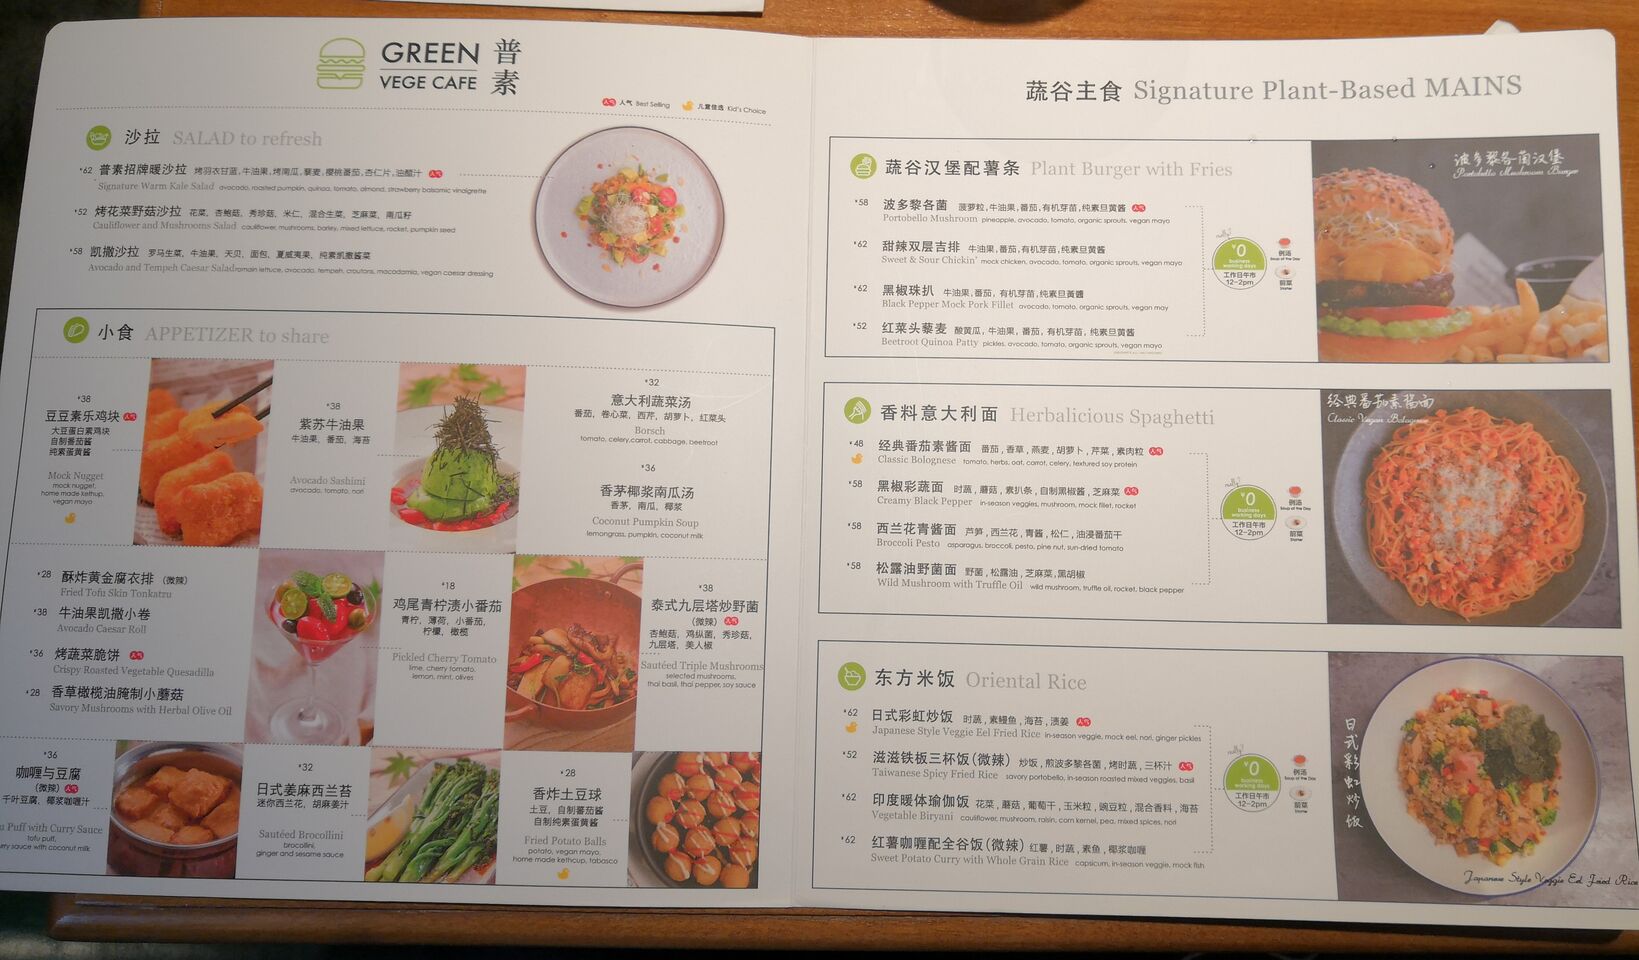 A photo of Green Vege Cafe